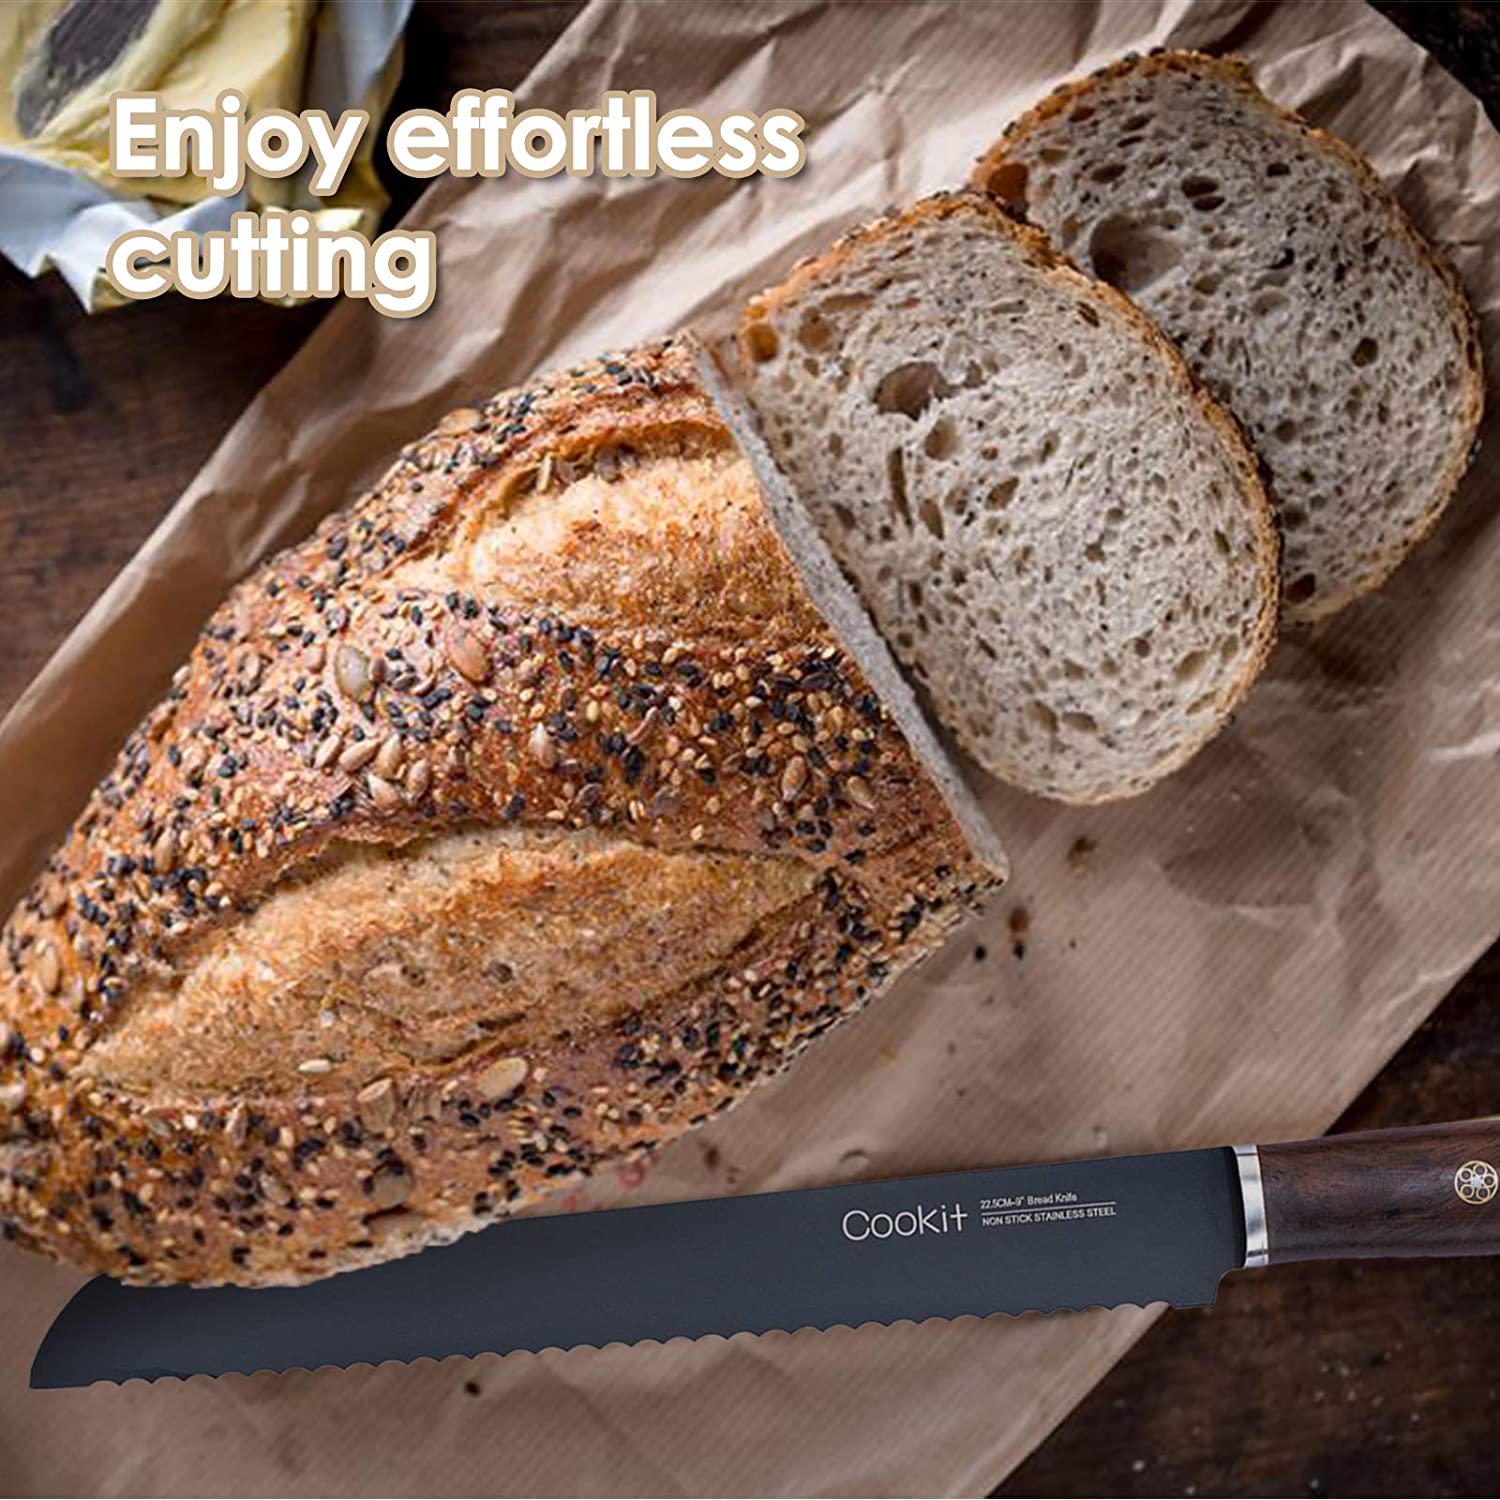 9 Inches Bread Knife Serrated Edge High Carbon Stainless Steel Forged Cutter for Homemade Crusty Bread Amazon Platform Banned